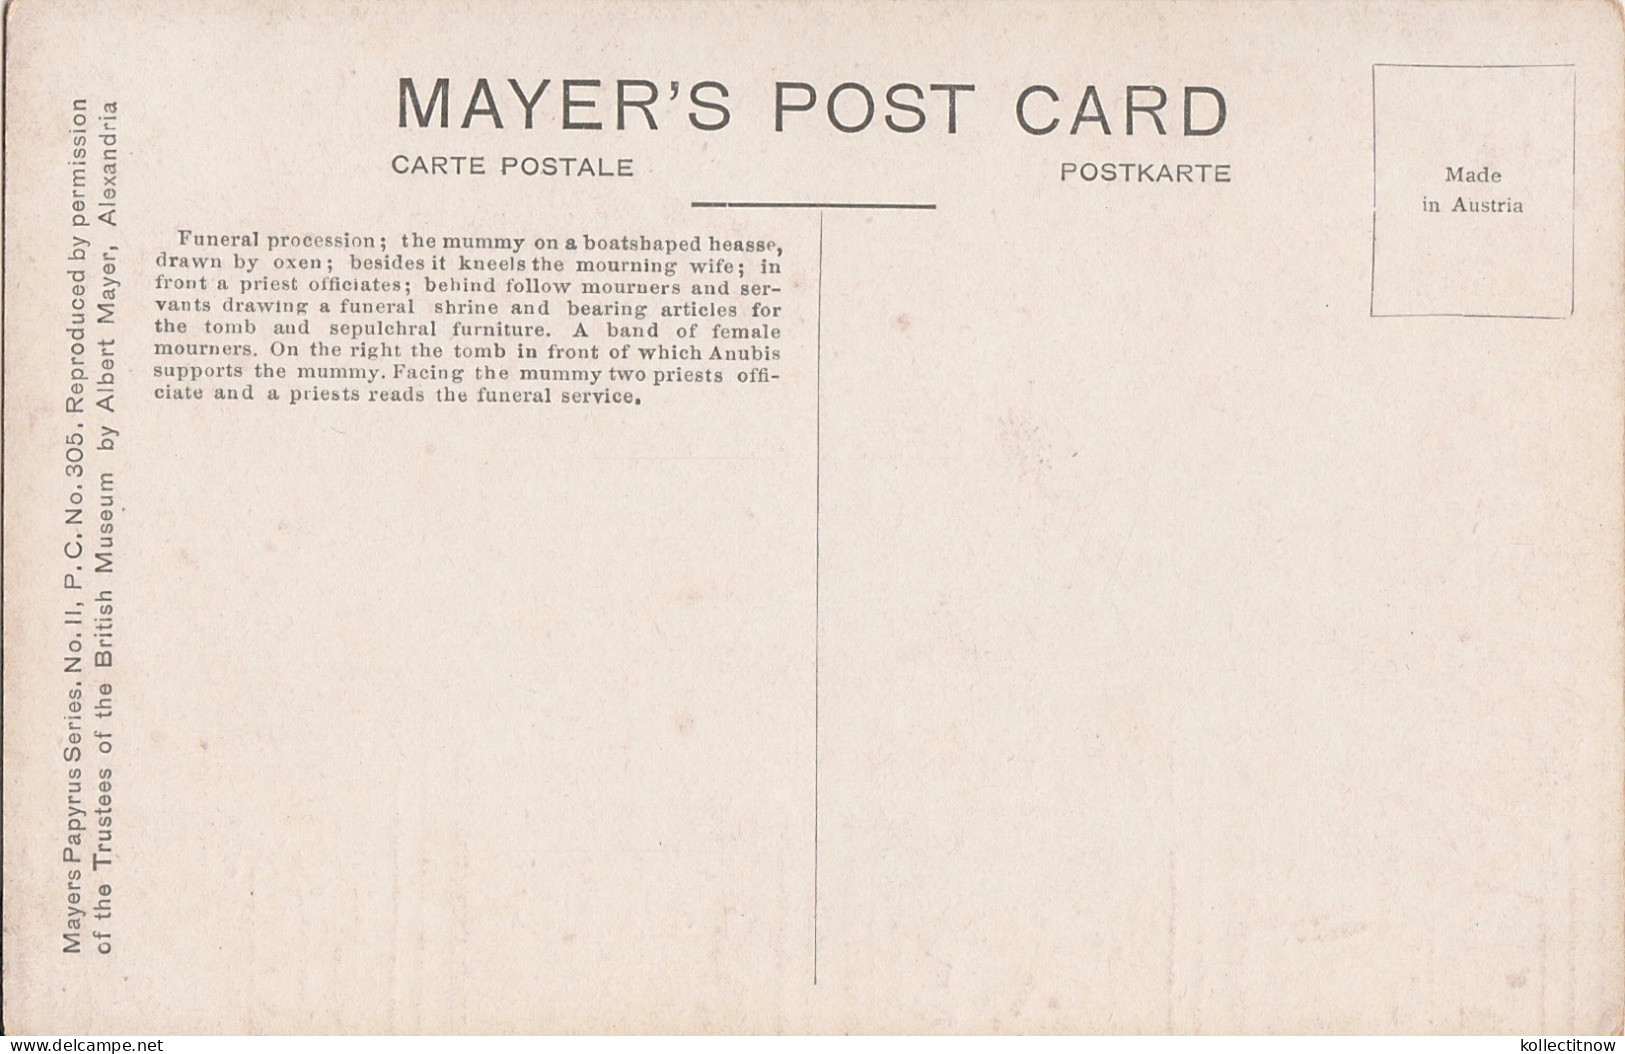 MAYER’s POST CARD - FUNERAL PROCESSION (2) - Museums